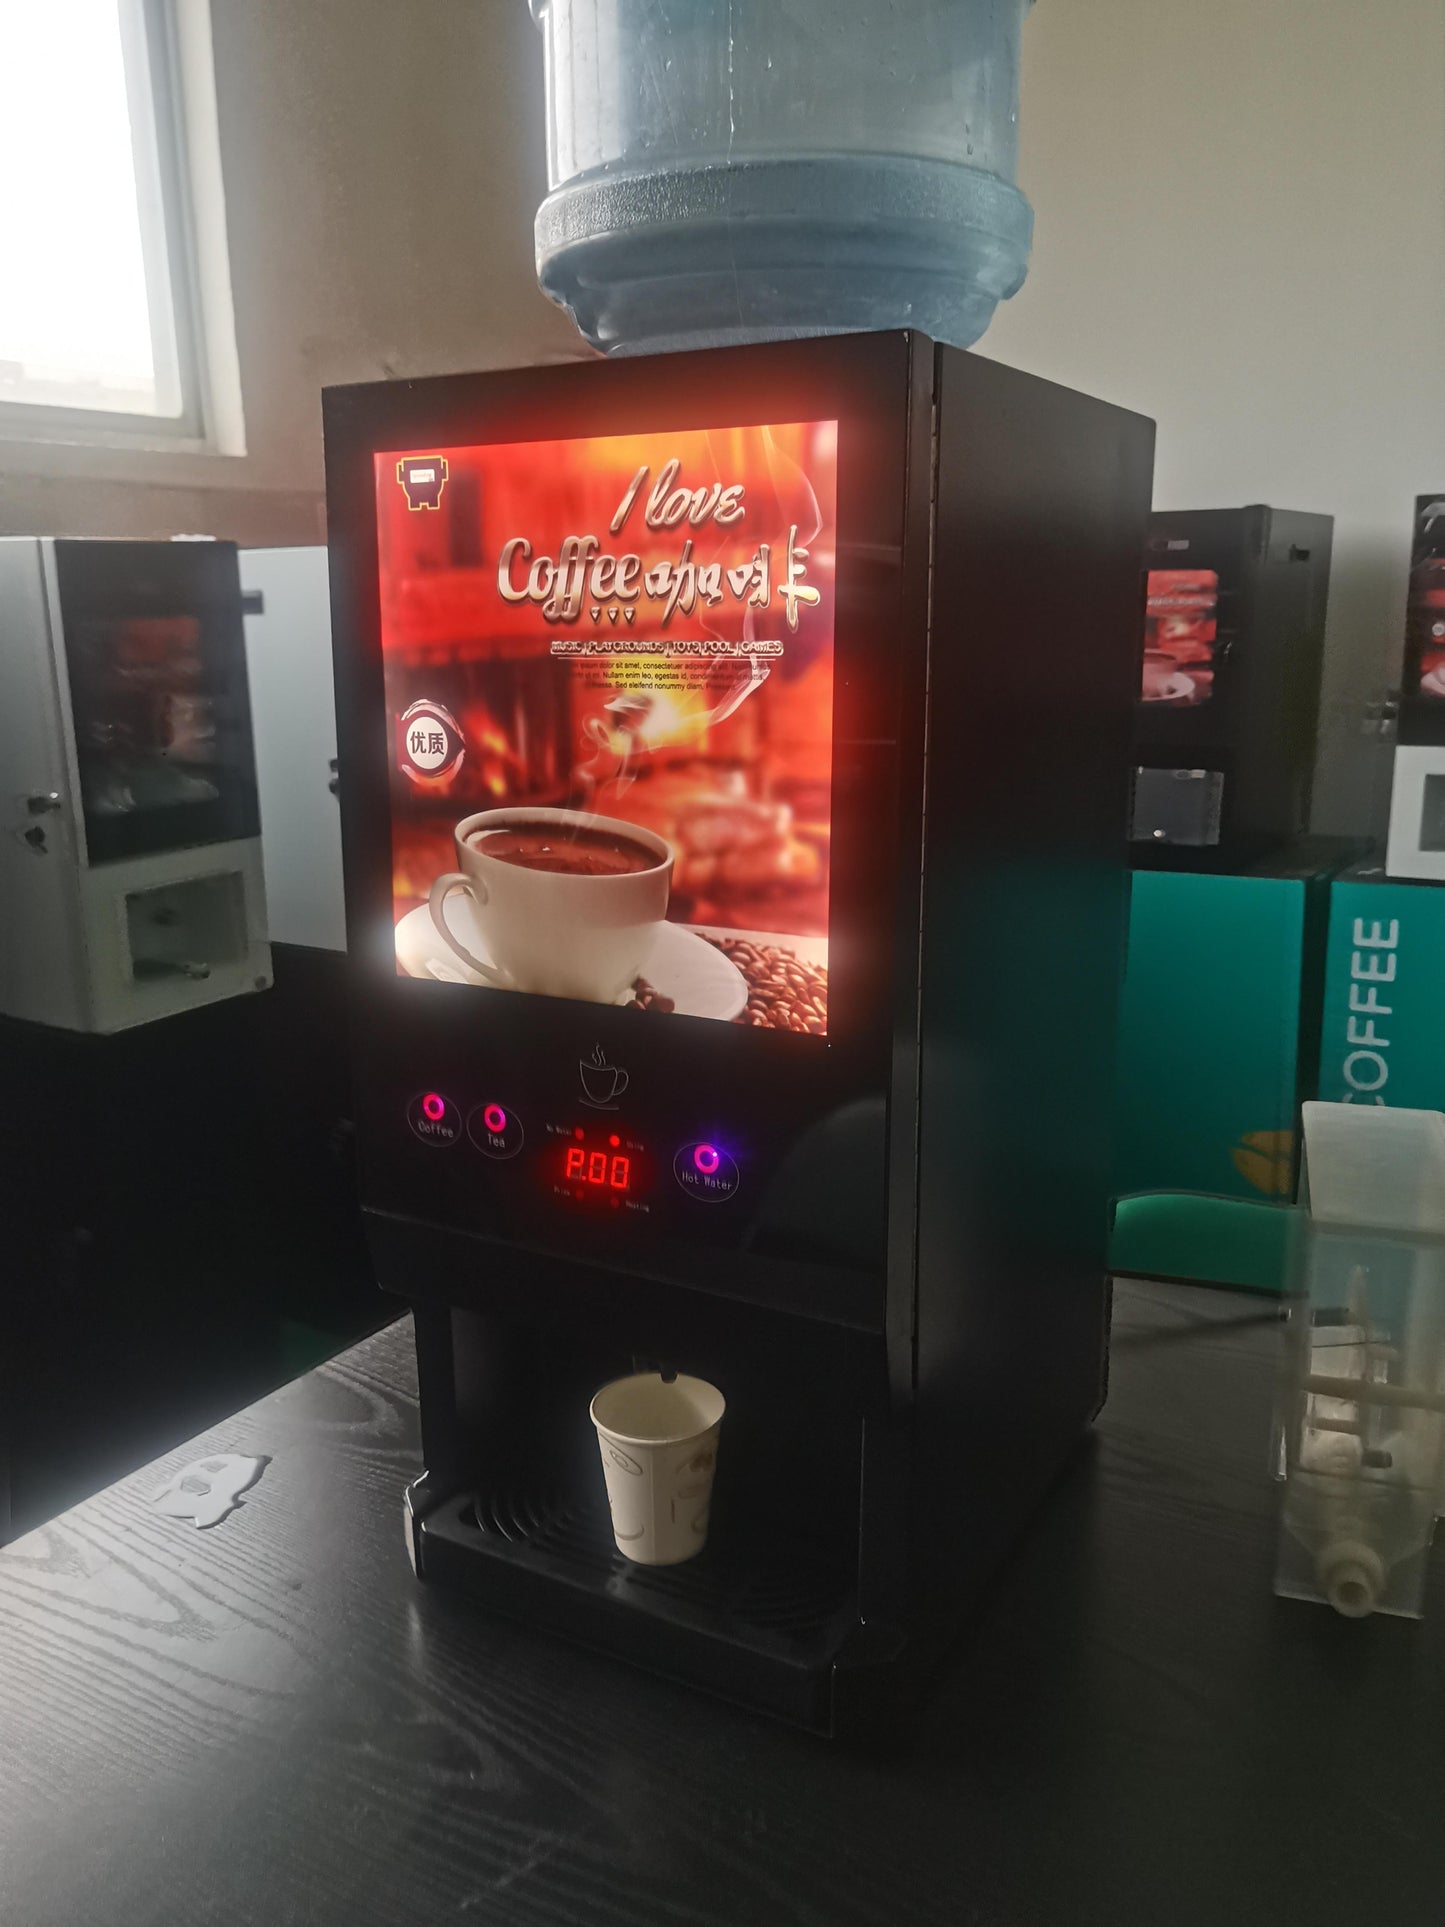 coffee vending machine Automatic commercial hot food ,coffee mahcine,vending machine - CECLE Machine